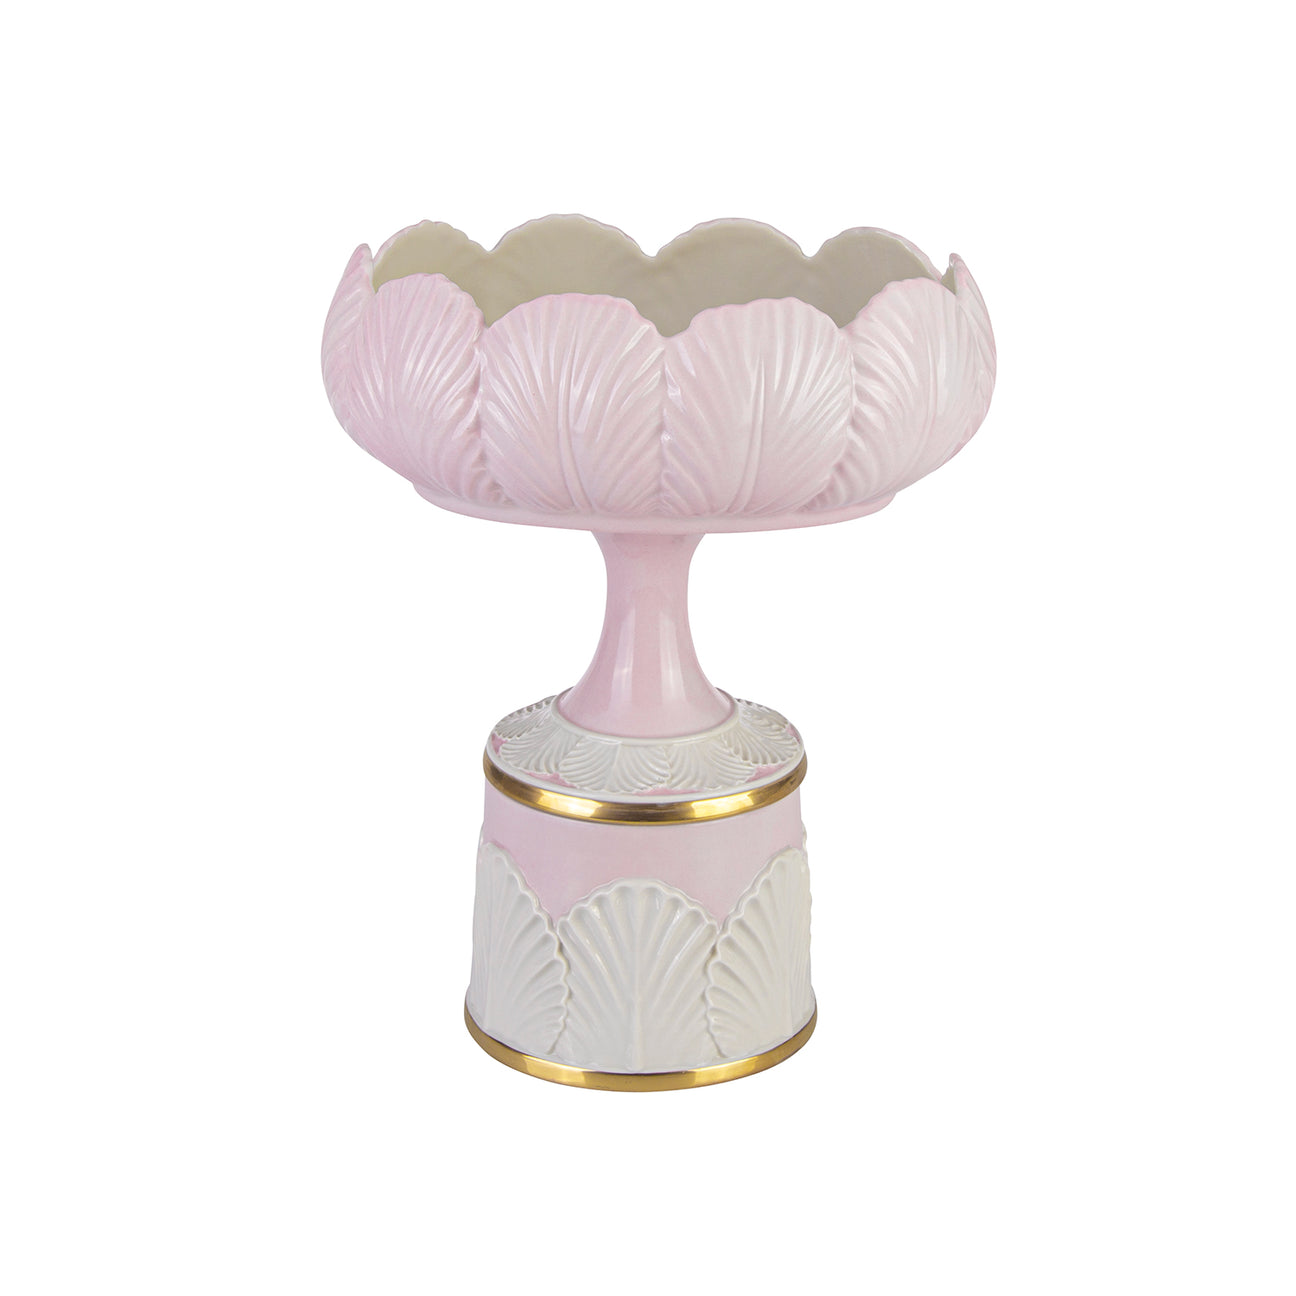 Tulip Serving Bowl Stand - Pink &amp; White 